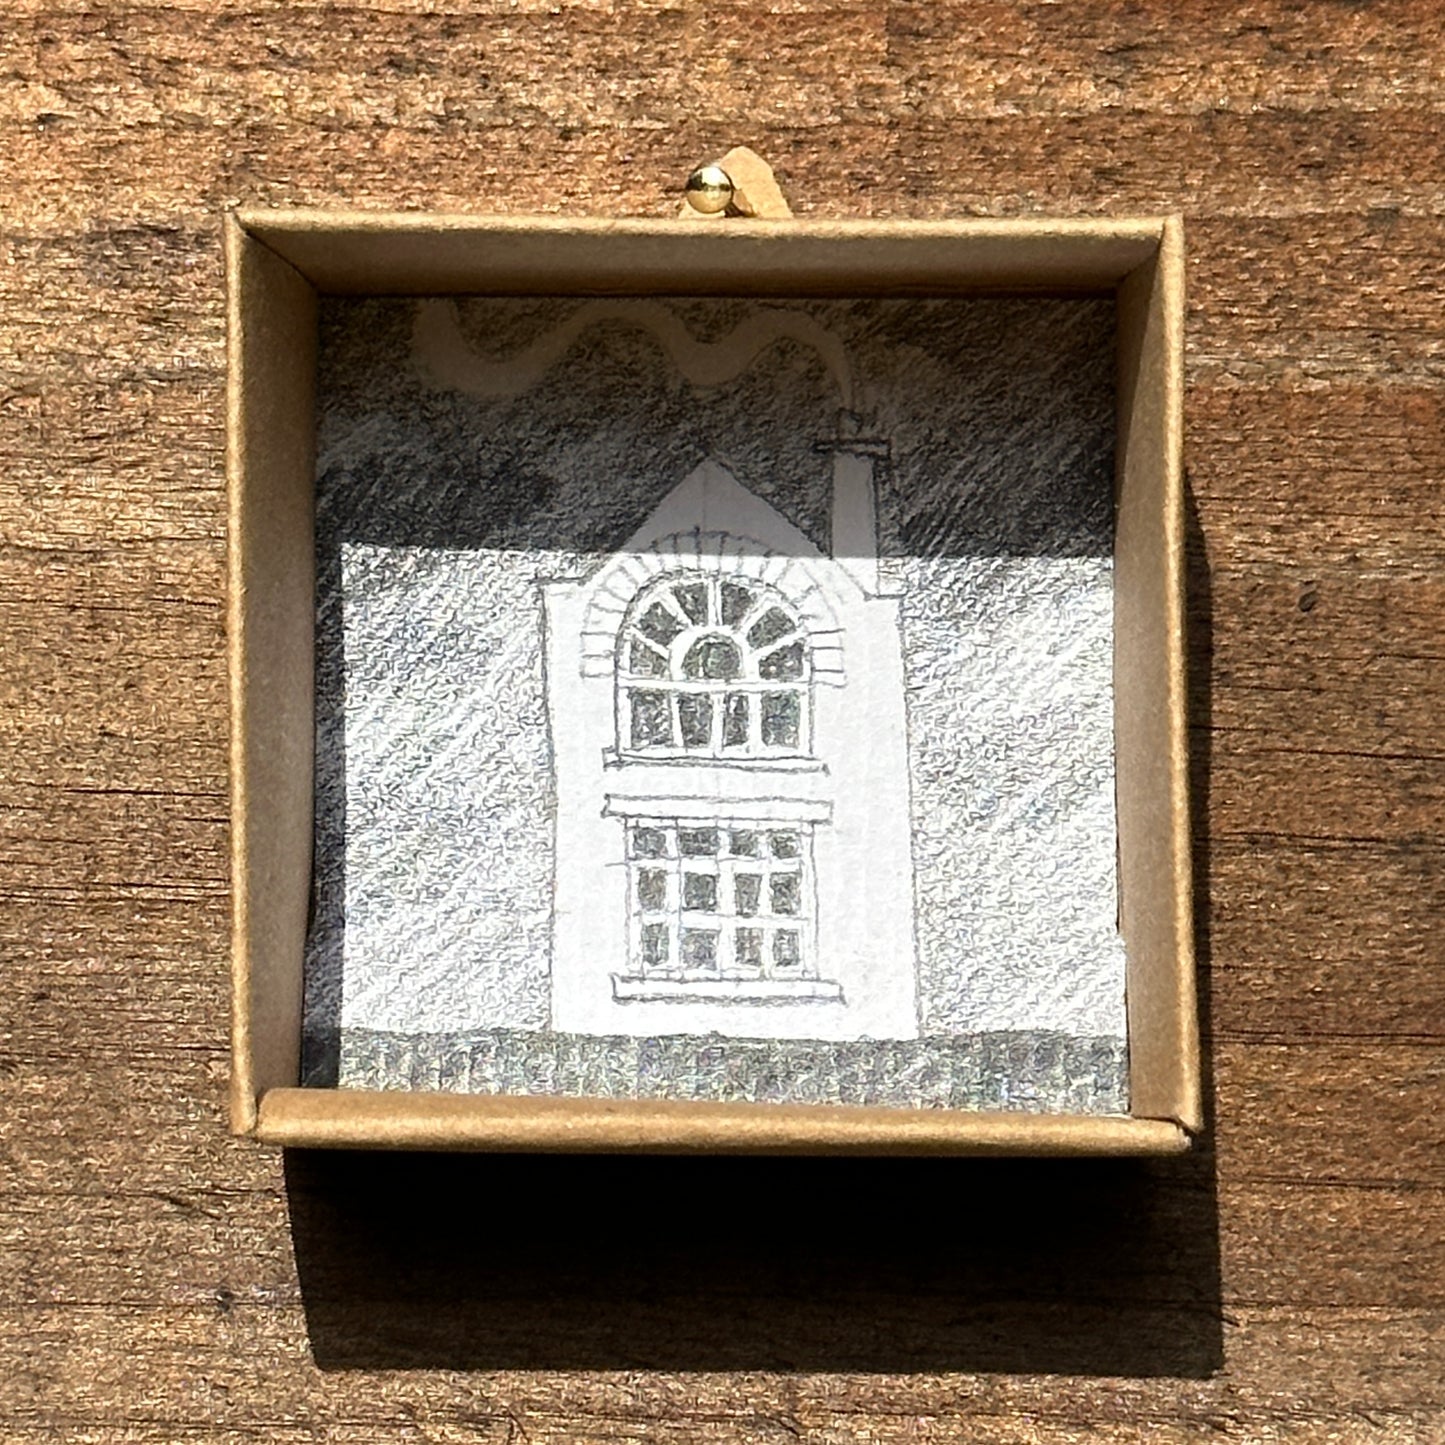  Display box for handmade paper house on plywood base.